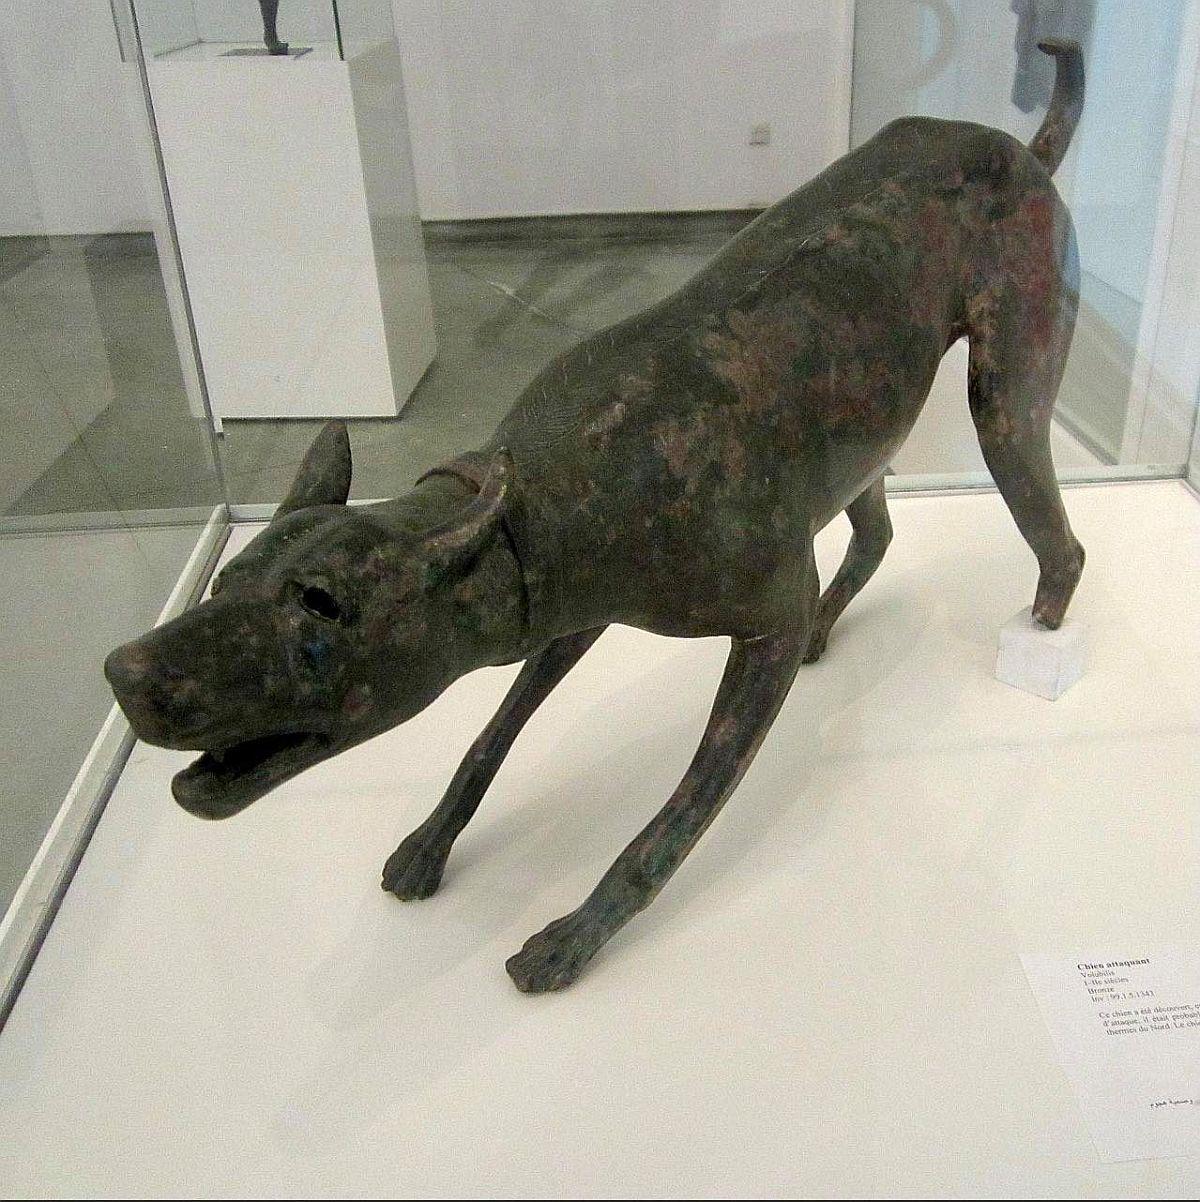 Roman sculpture from Volubilis (present northern Morocco) showing a dog. The object was found in 1916 and dates back to the beginning of the 2nd century CE. Currently, in the Archaeological Museum in Rabat.jpeg